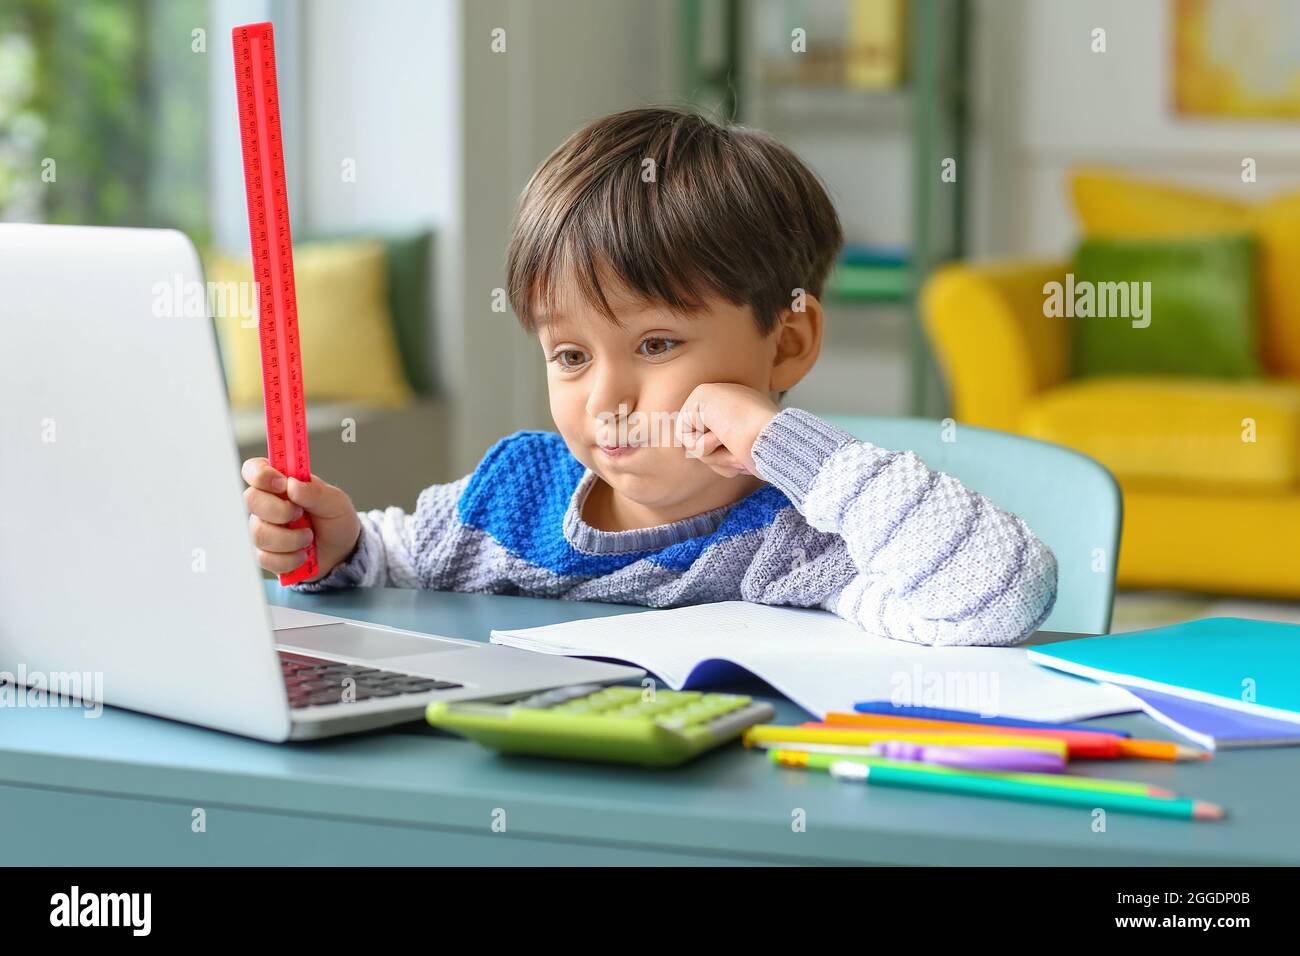 Little boy tired of studying online at home Stock Photo